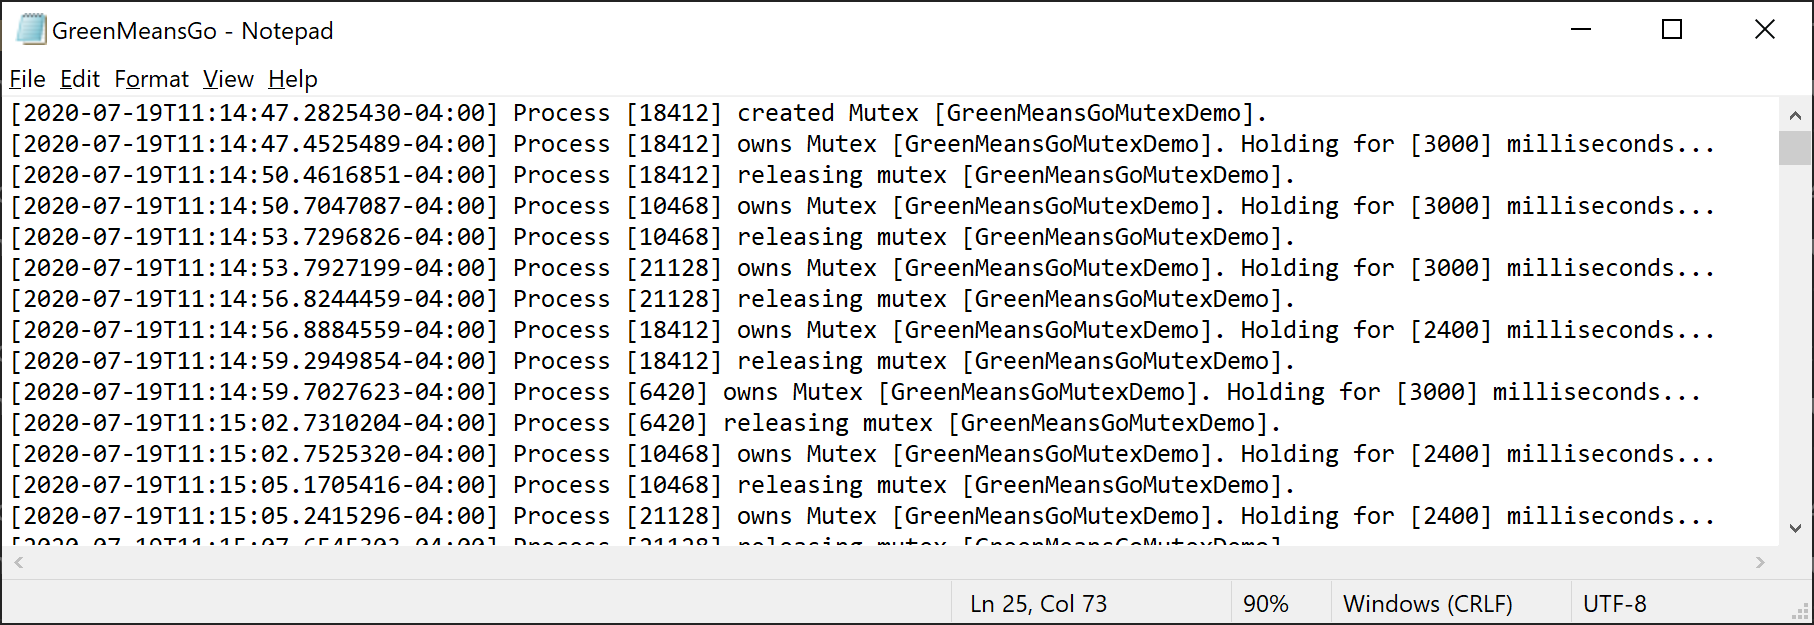 green_means_go_log_file.png